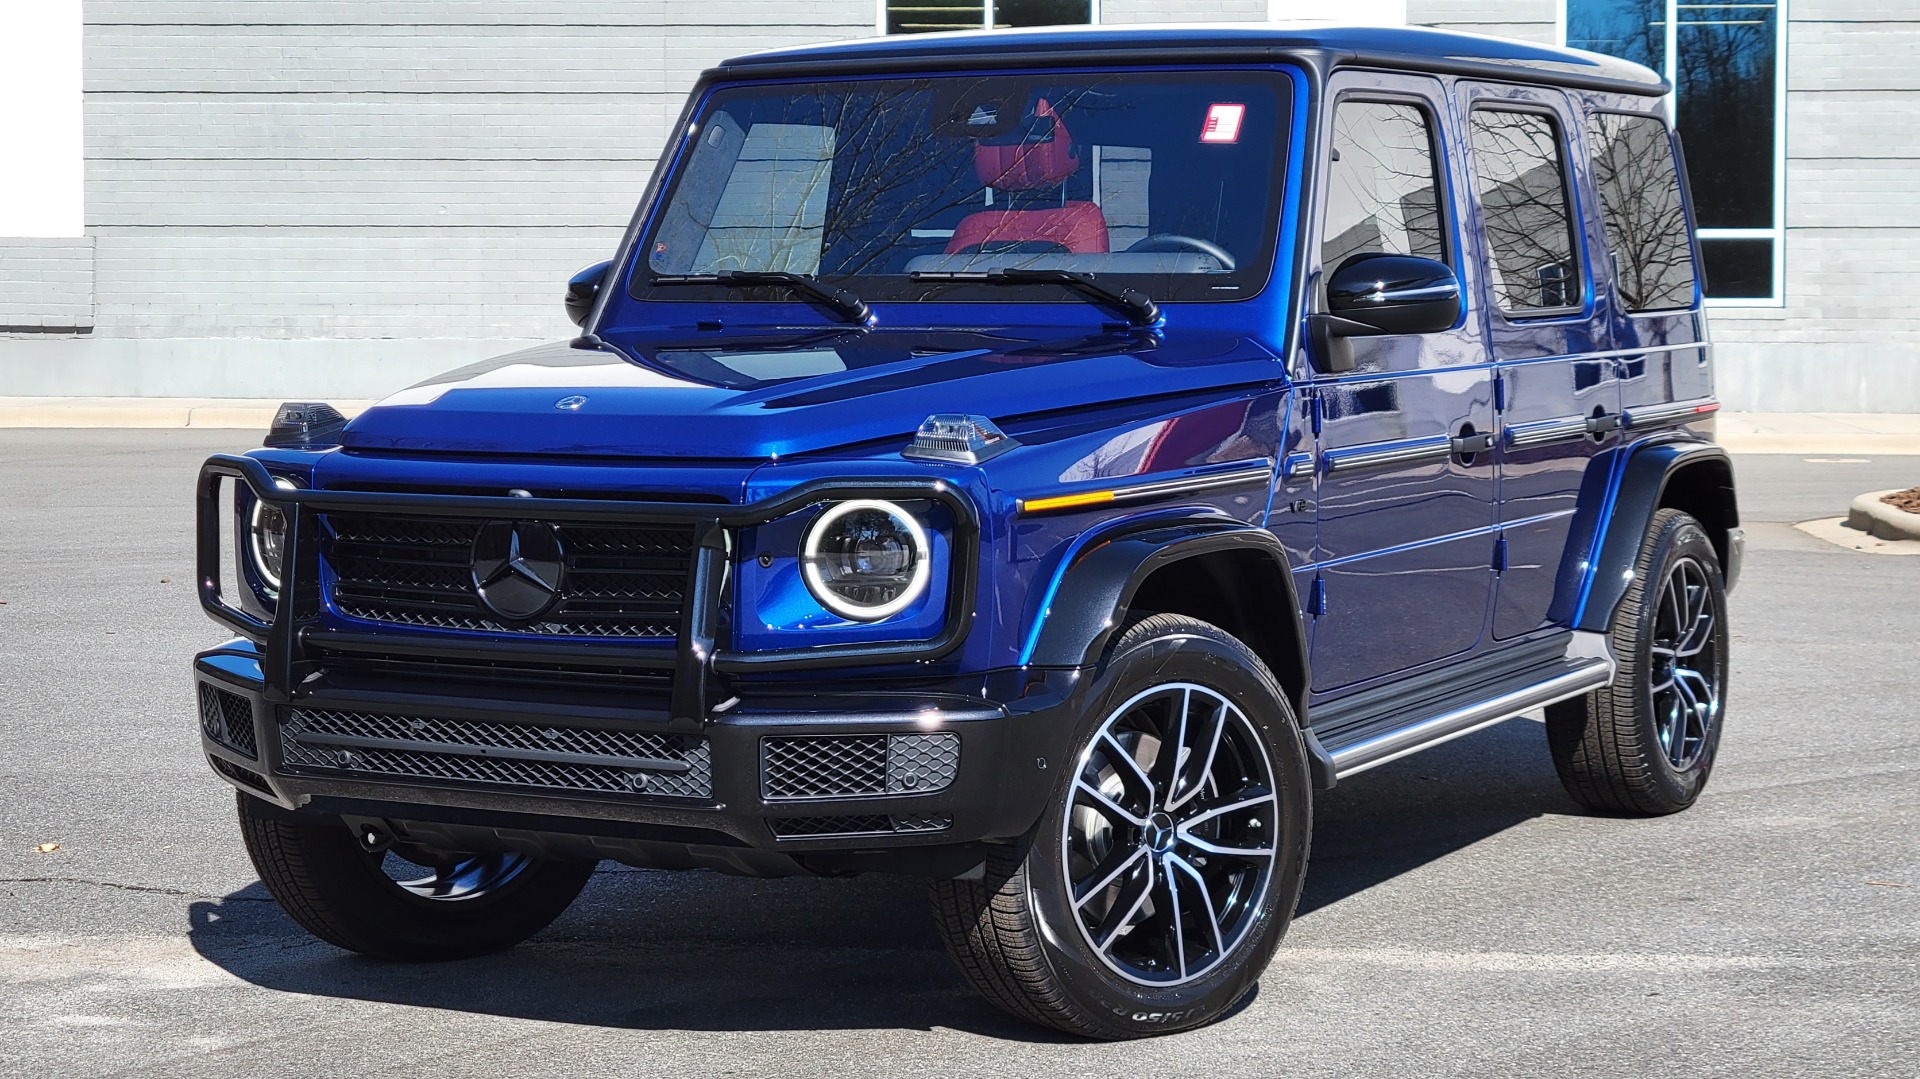 Used 2021 Mercedes-Benz G-CLASS G 550 4MATIC SUV / AMG LINE / EXCLUSIVE INTR / NIGHT PKG PLUS for sale $199,999 at Formula Imports in Charlotte NC 28227 1